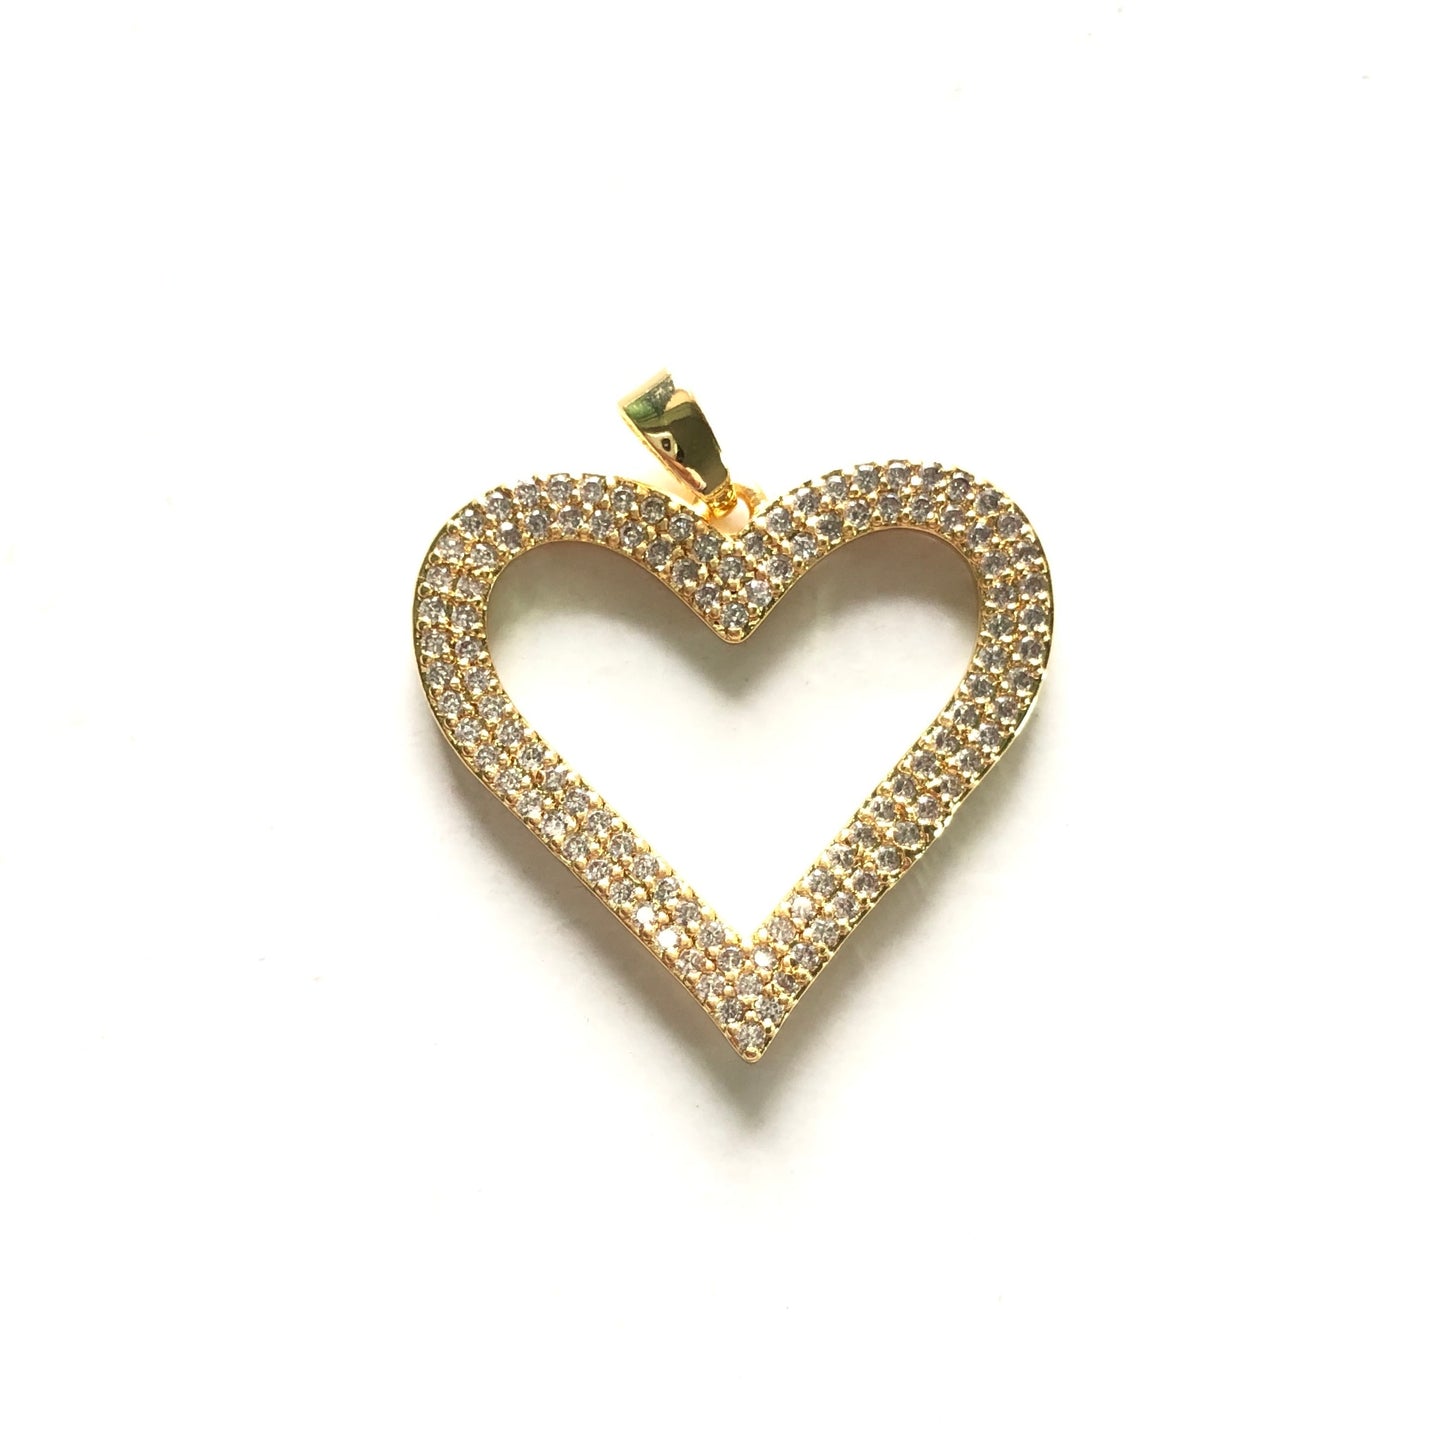 10pcs/lot 25*24mm CZ Paved Heart Charms Gold CZ Paved Charms Hearts Charms Beads Beyond